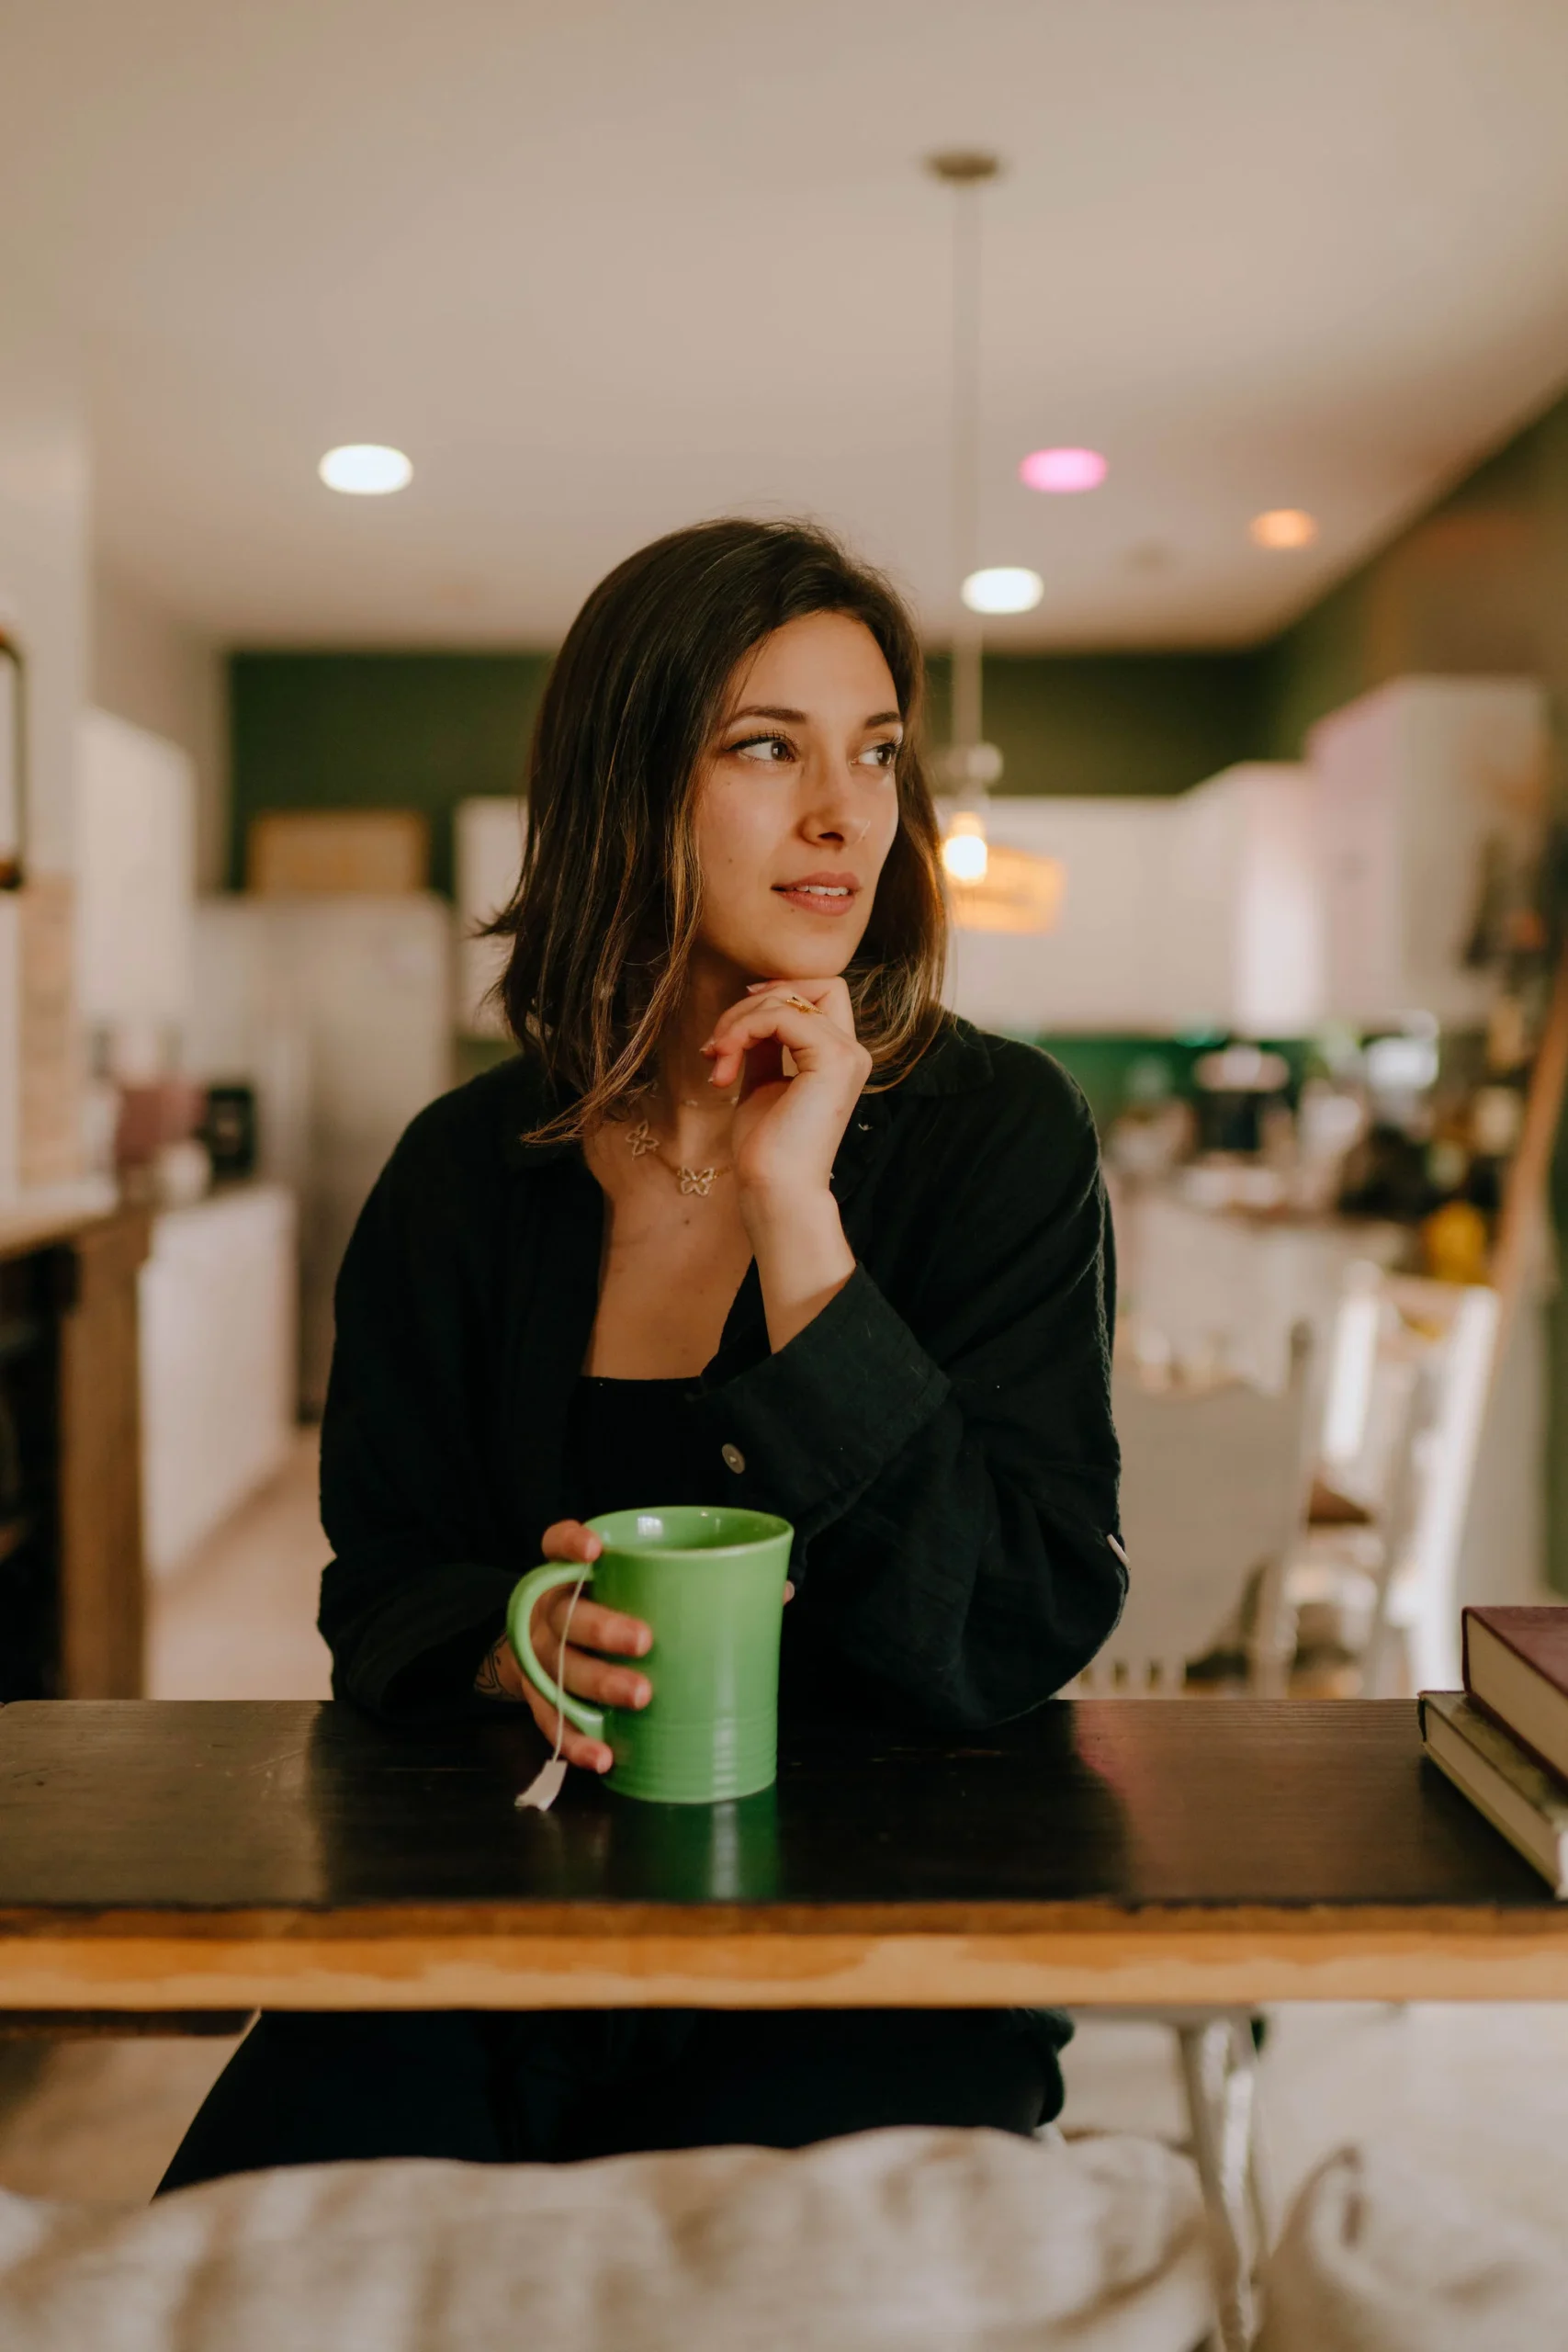 image of a girl wearing all black and holding a green teacup in her kitchen